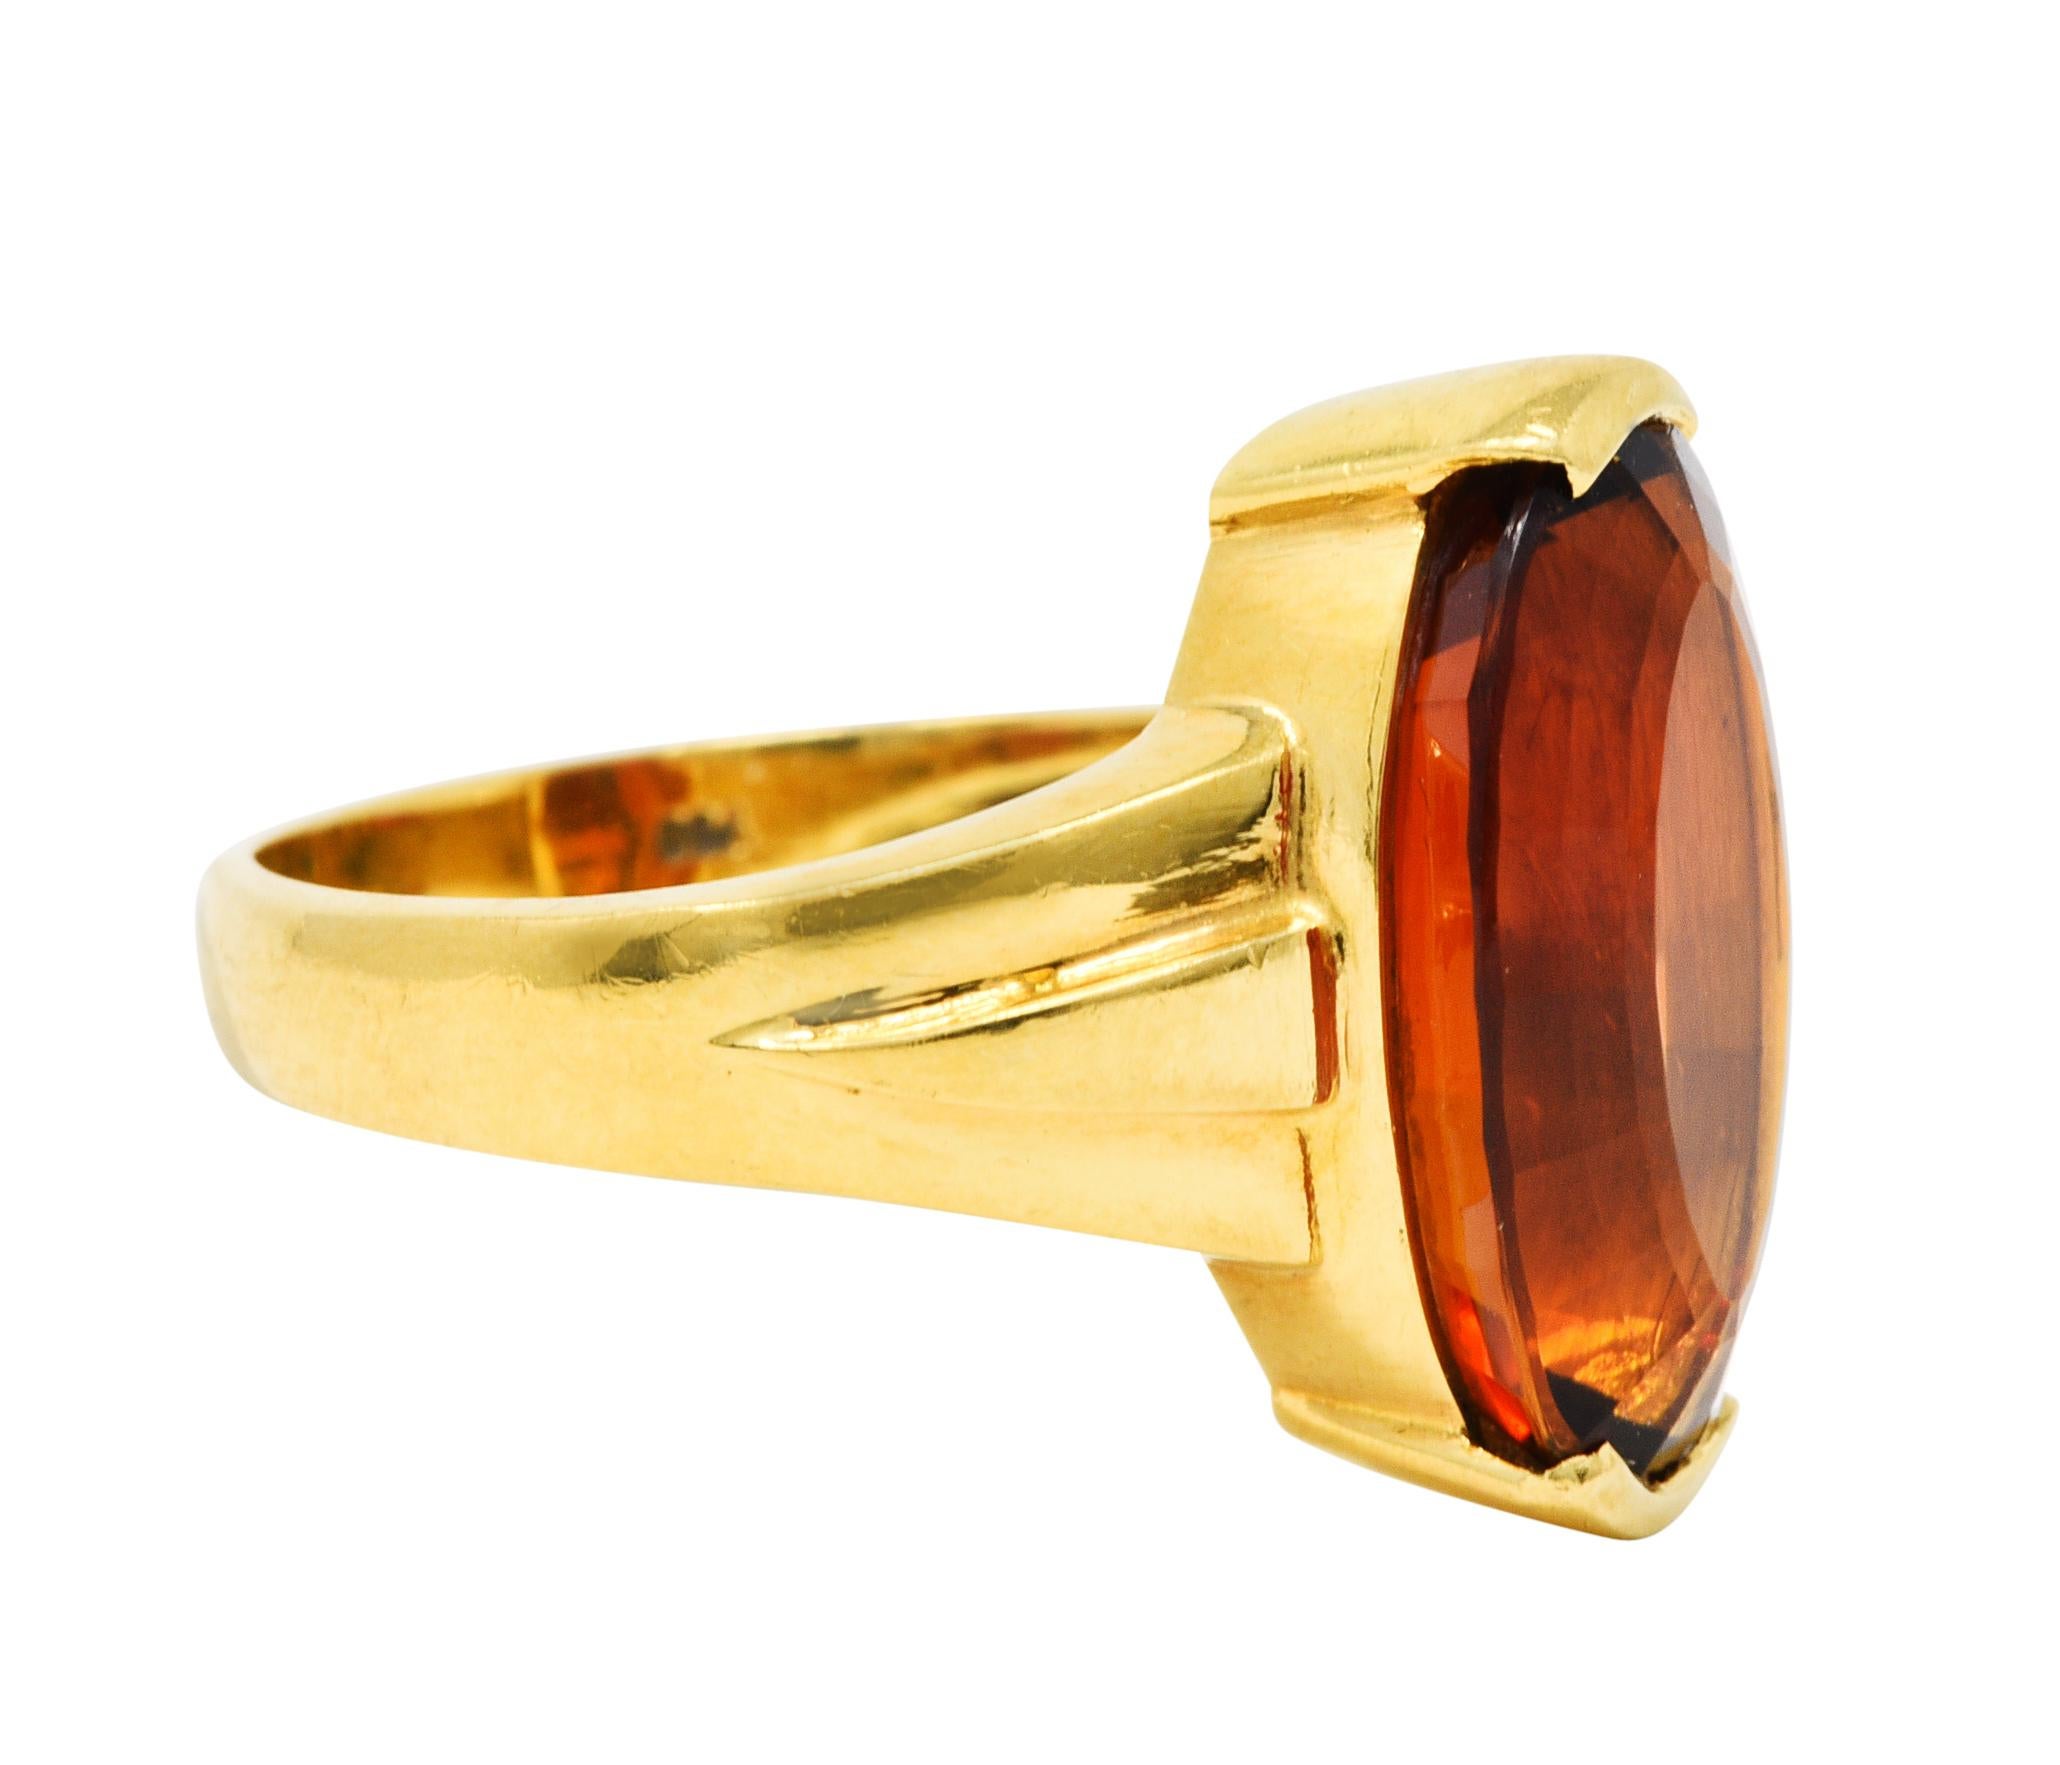 Featuring an oval mixed cut citrine measuring approximately 15.5 x 10.0 mm

Half bezel set and exhibits strong brownish orange color

Completed by stylized geometric shoulders

Stamped 750 for 18 karat gold

Maker's mark for H. Stern

Circa: